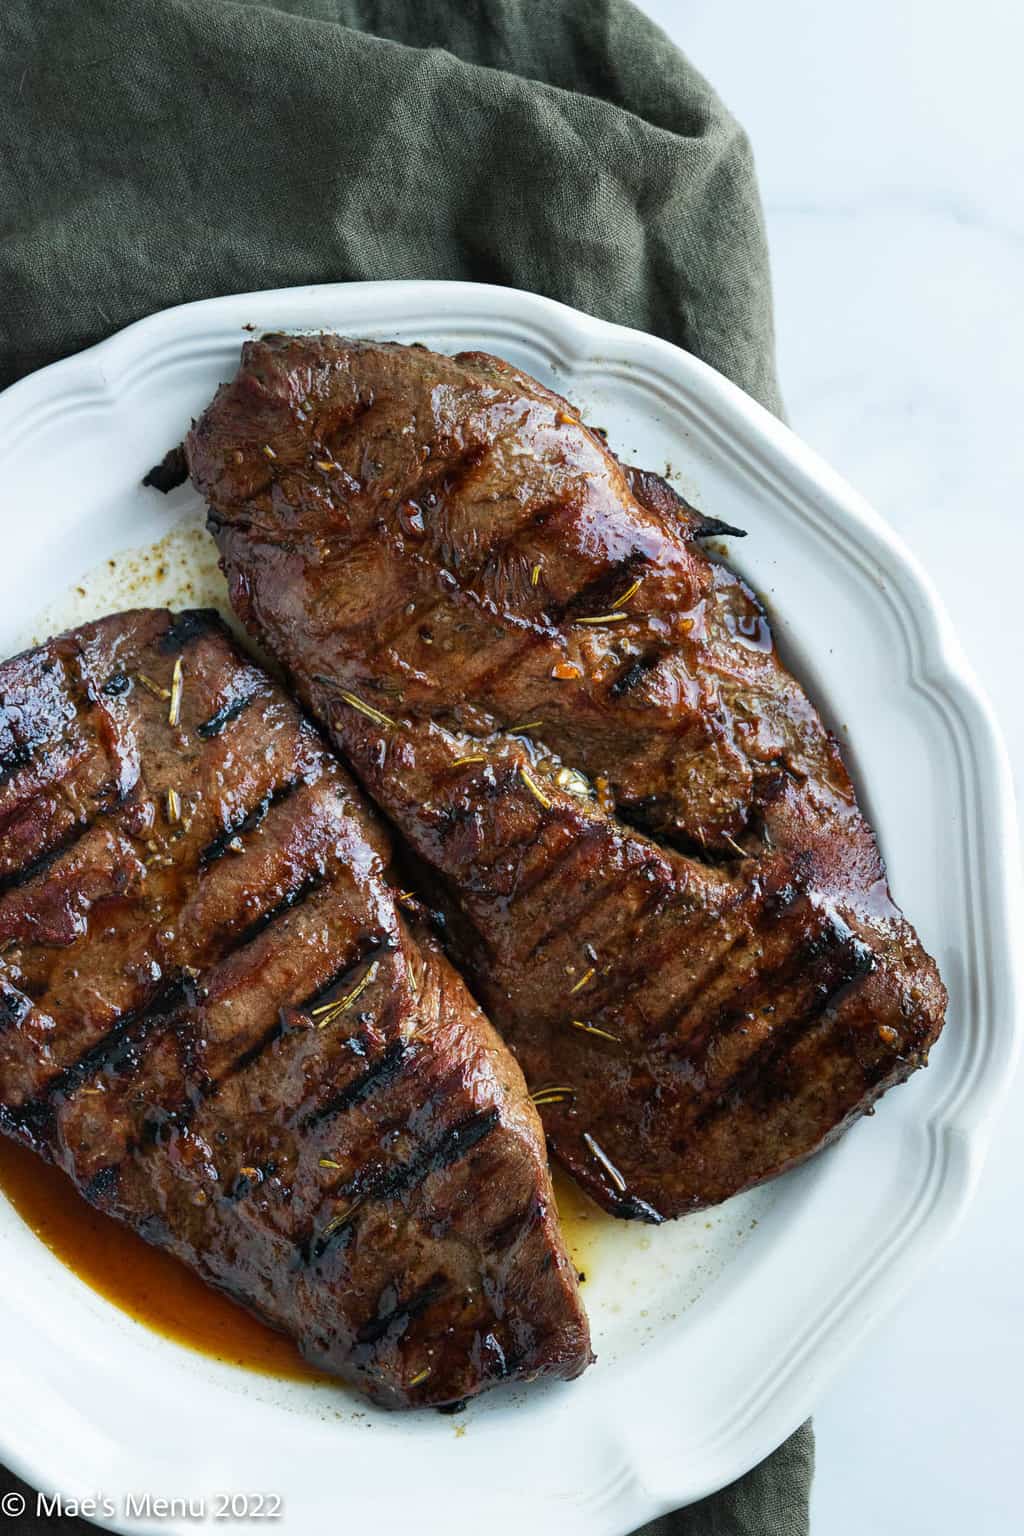 Two pieces of grilled flat iron steak on a white serving plate.